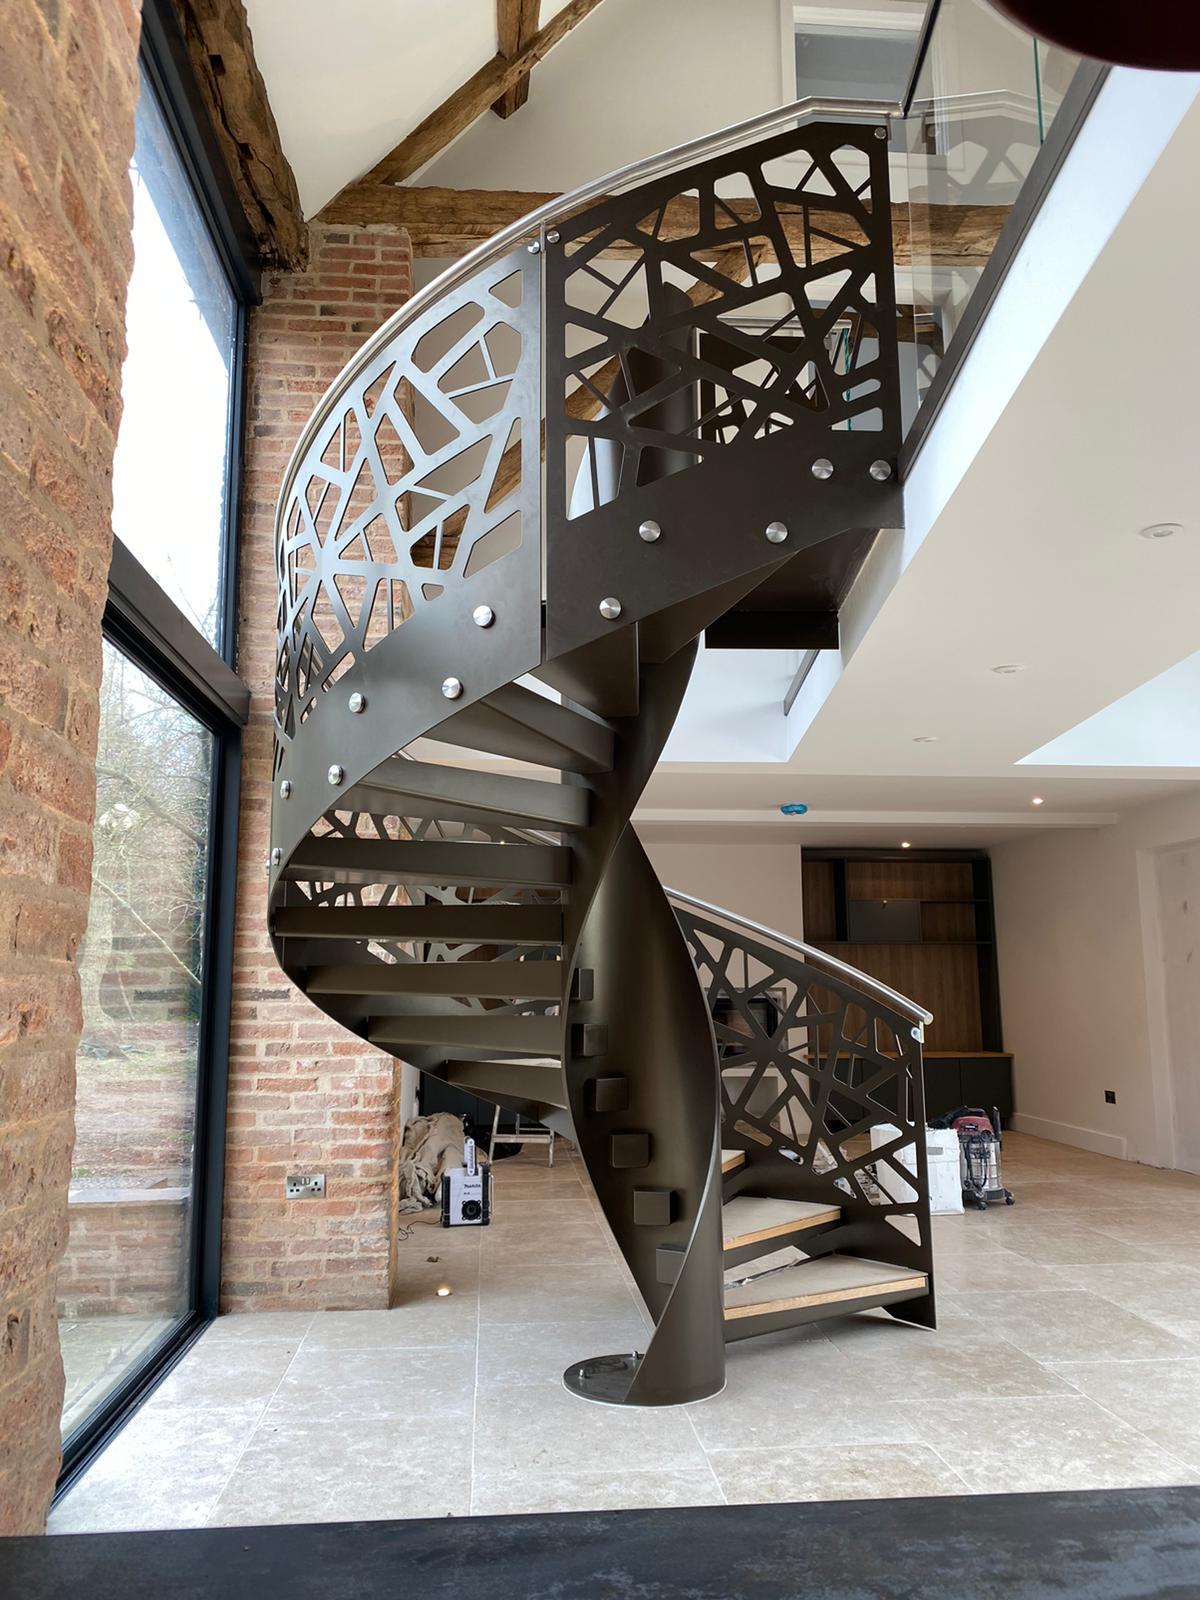 Bespoke staircases – what materials can be used?